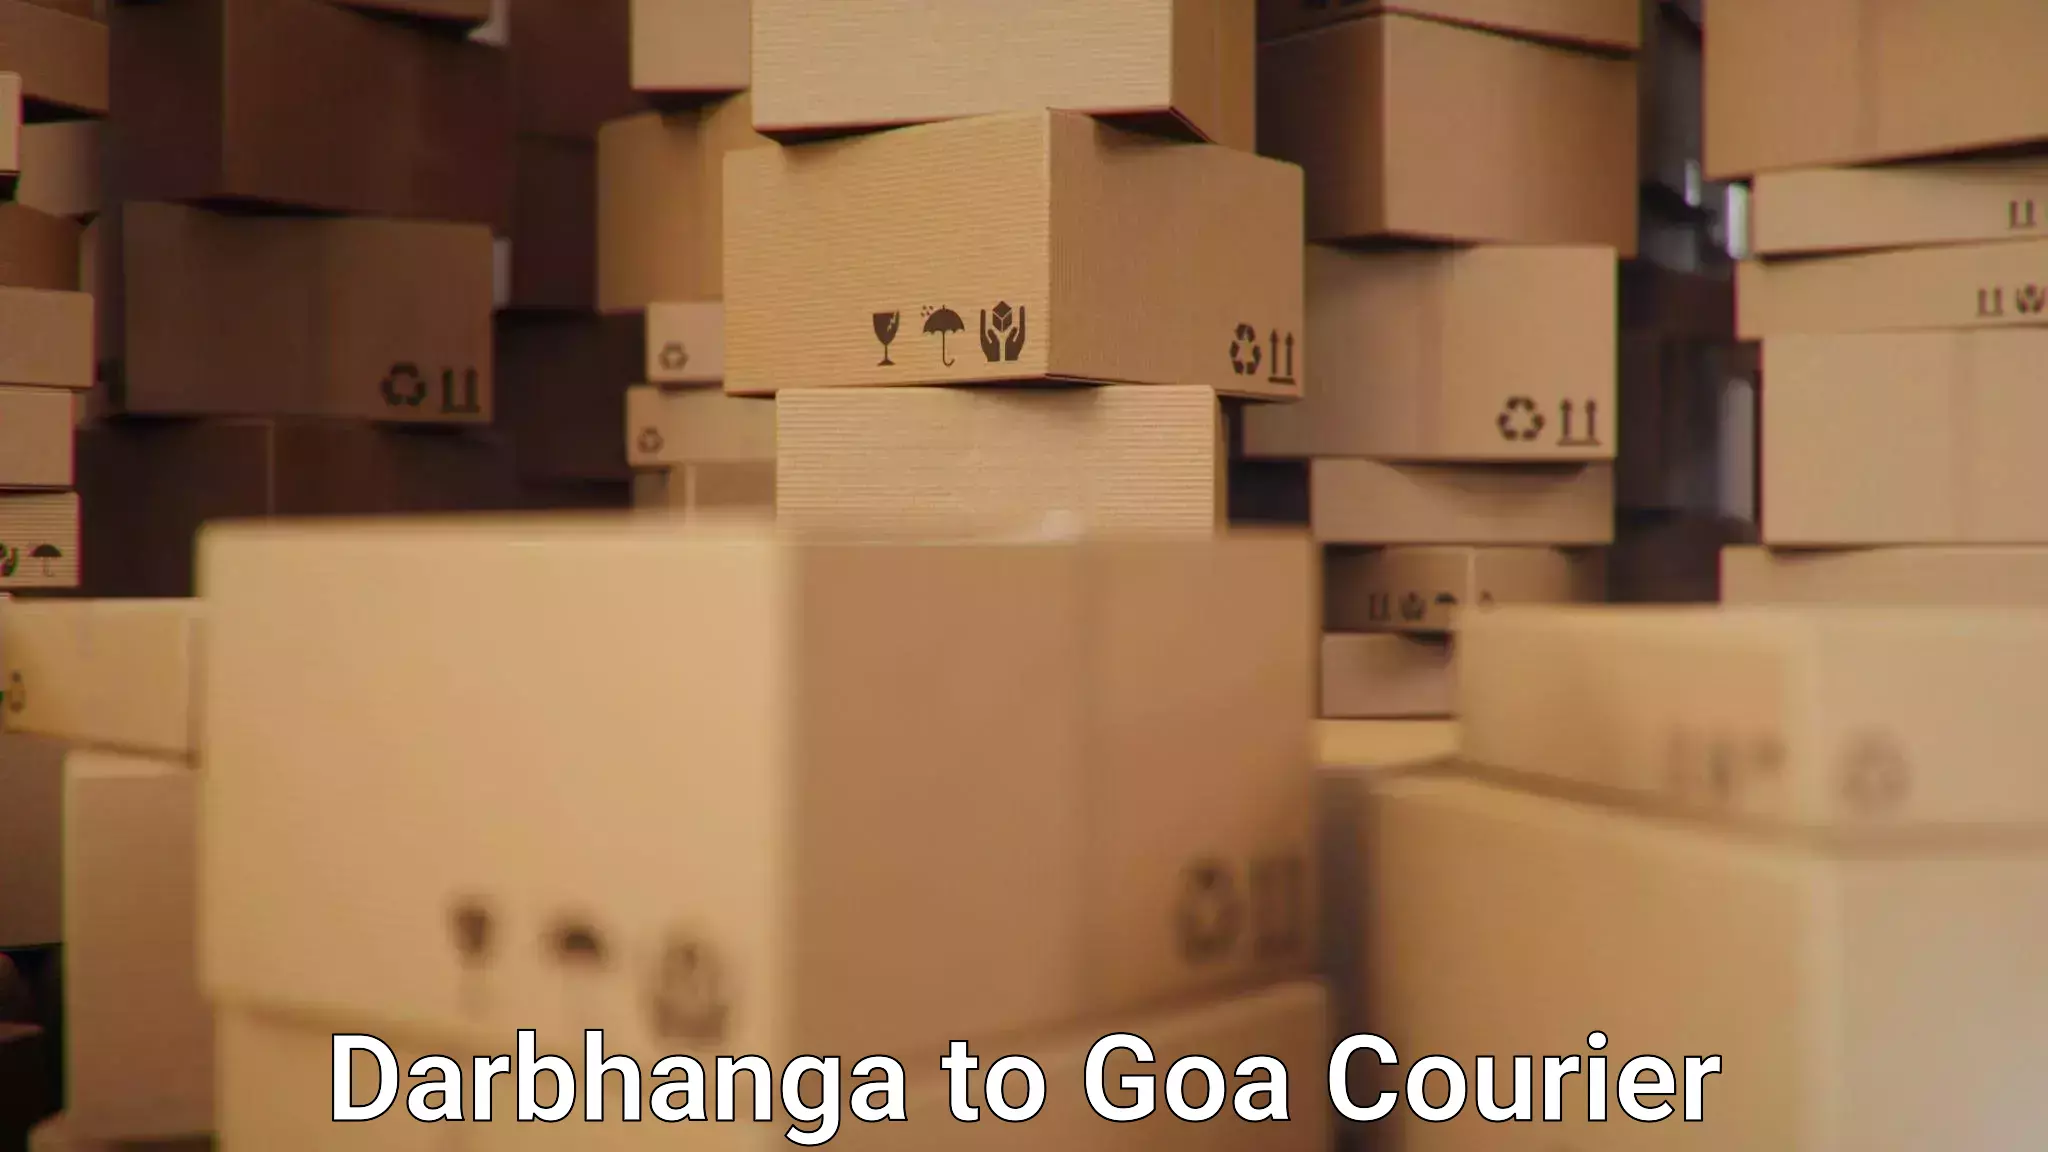 Business delivery service Darbhanga to Goa